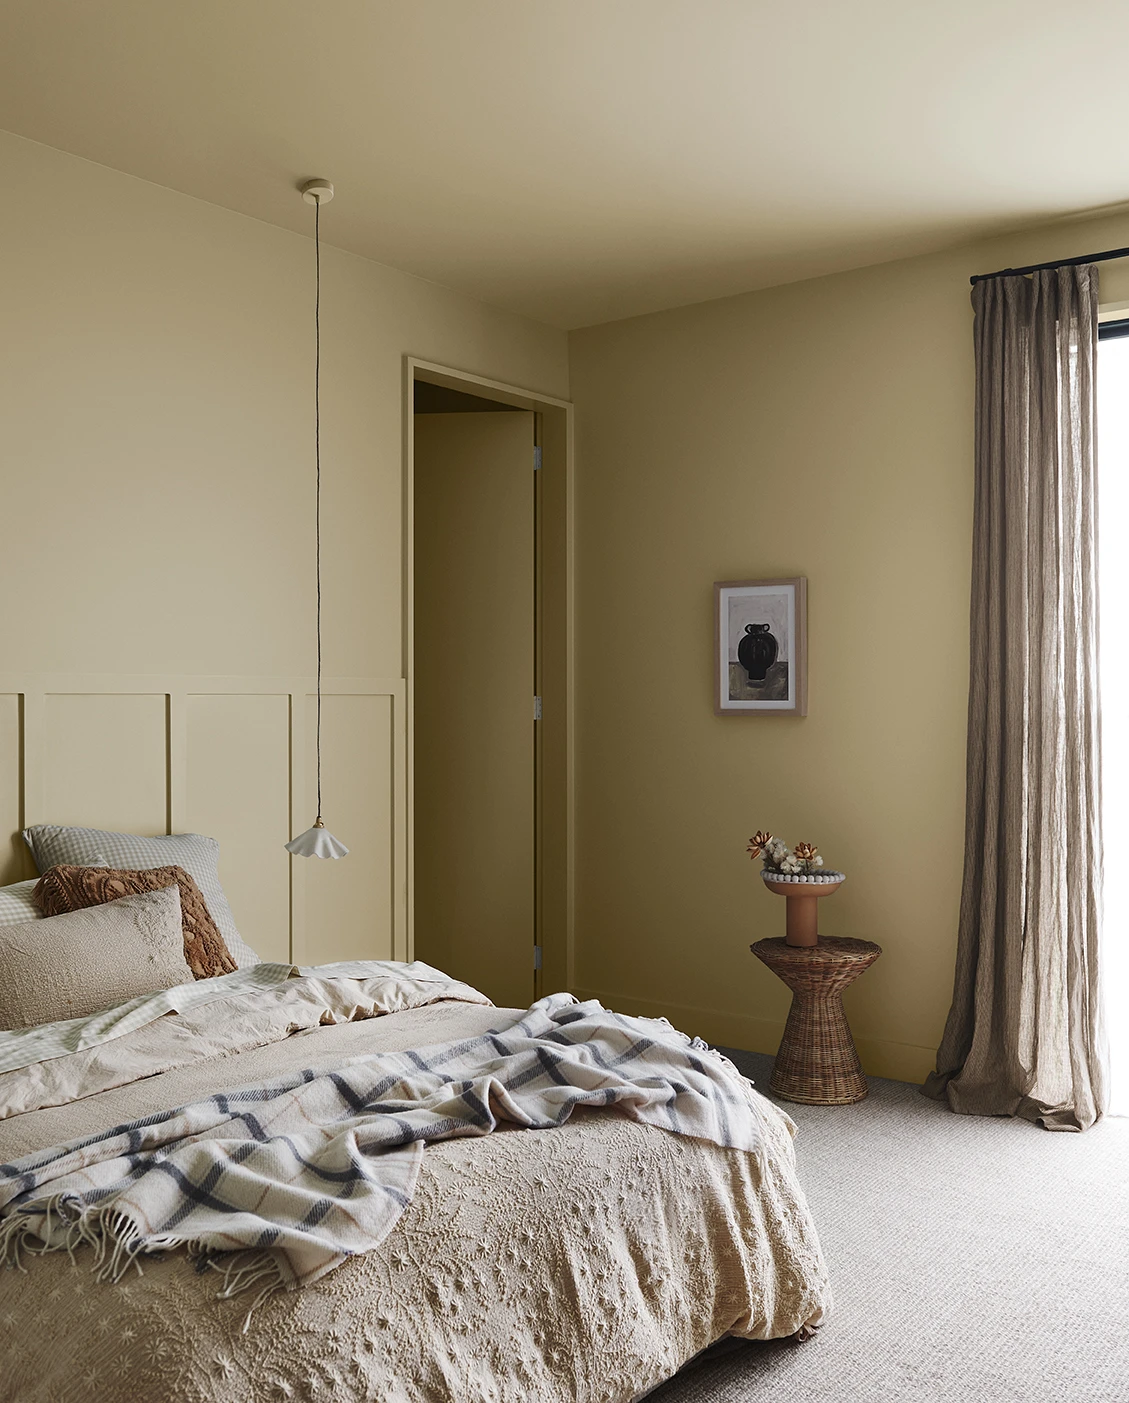 Beaten Track is a soft yellow tan that can add a cosy sense of warmth to any space. Pair it with a warm white like Natural White™ or deep browns like Namadji®. This colour can be used as a main wall or feature colour both inside and out.